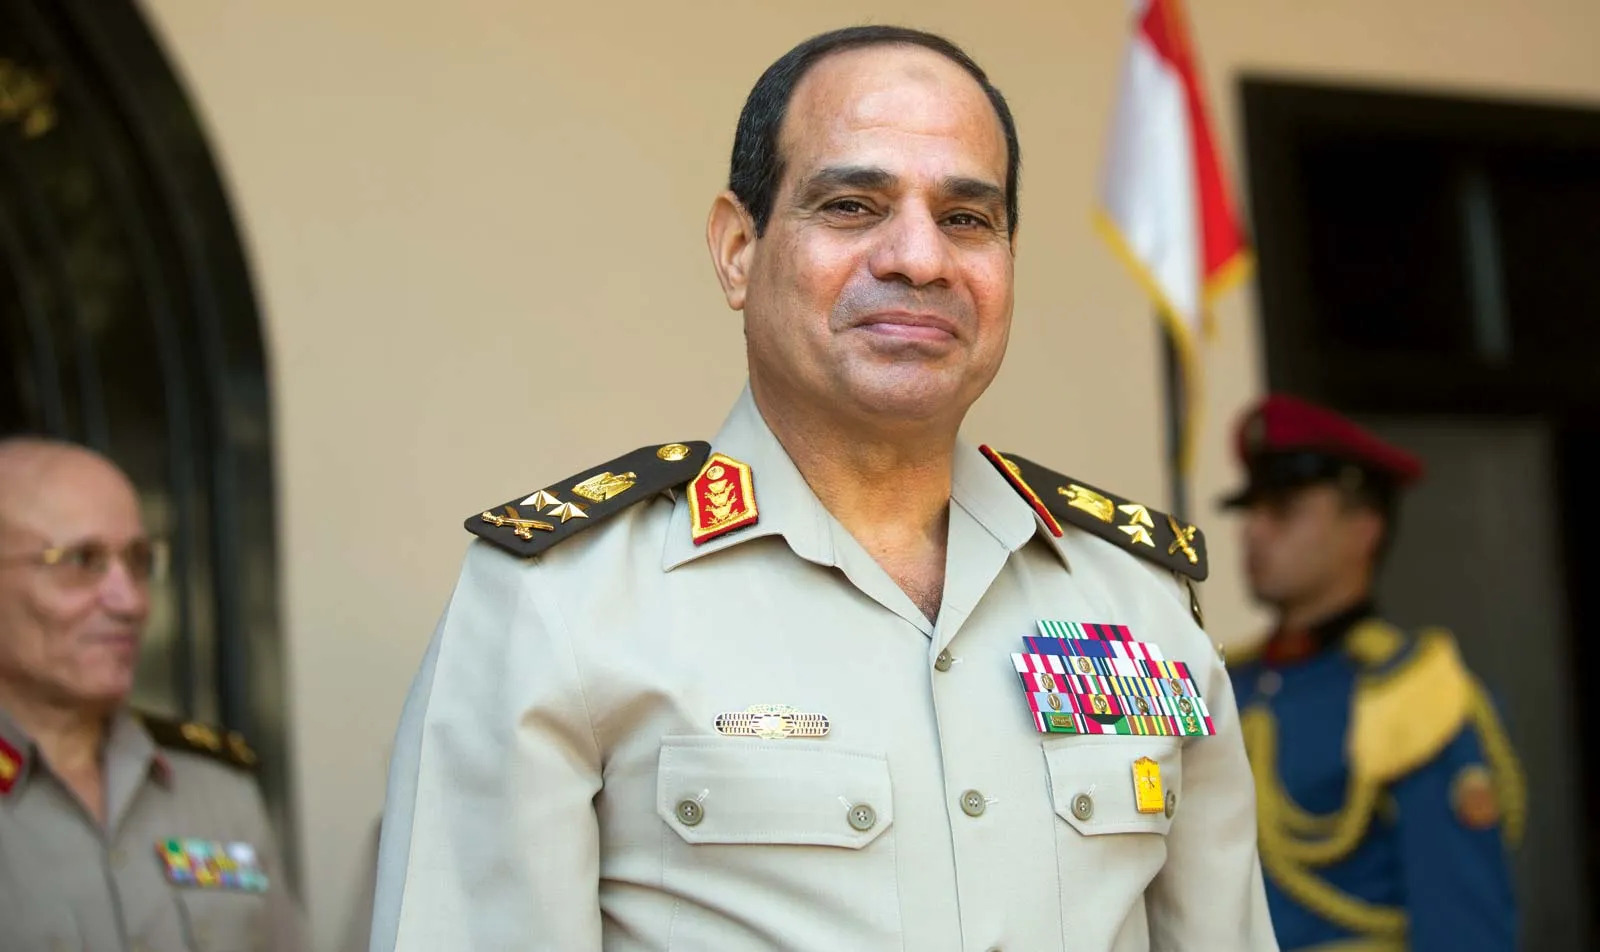 President Sisi approves 13% increase in pensions: Egypt’s PM